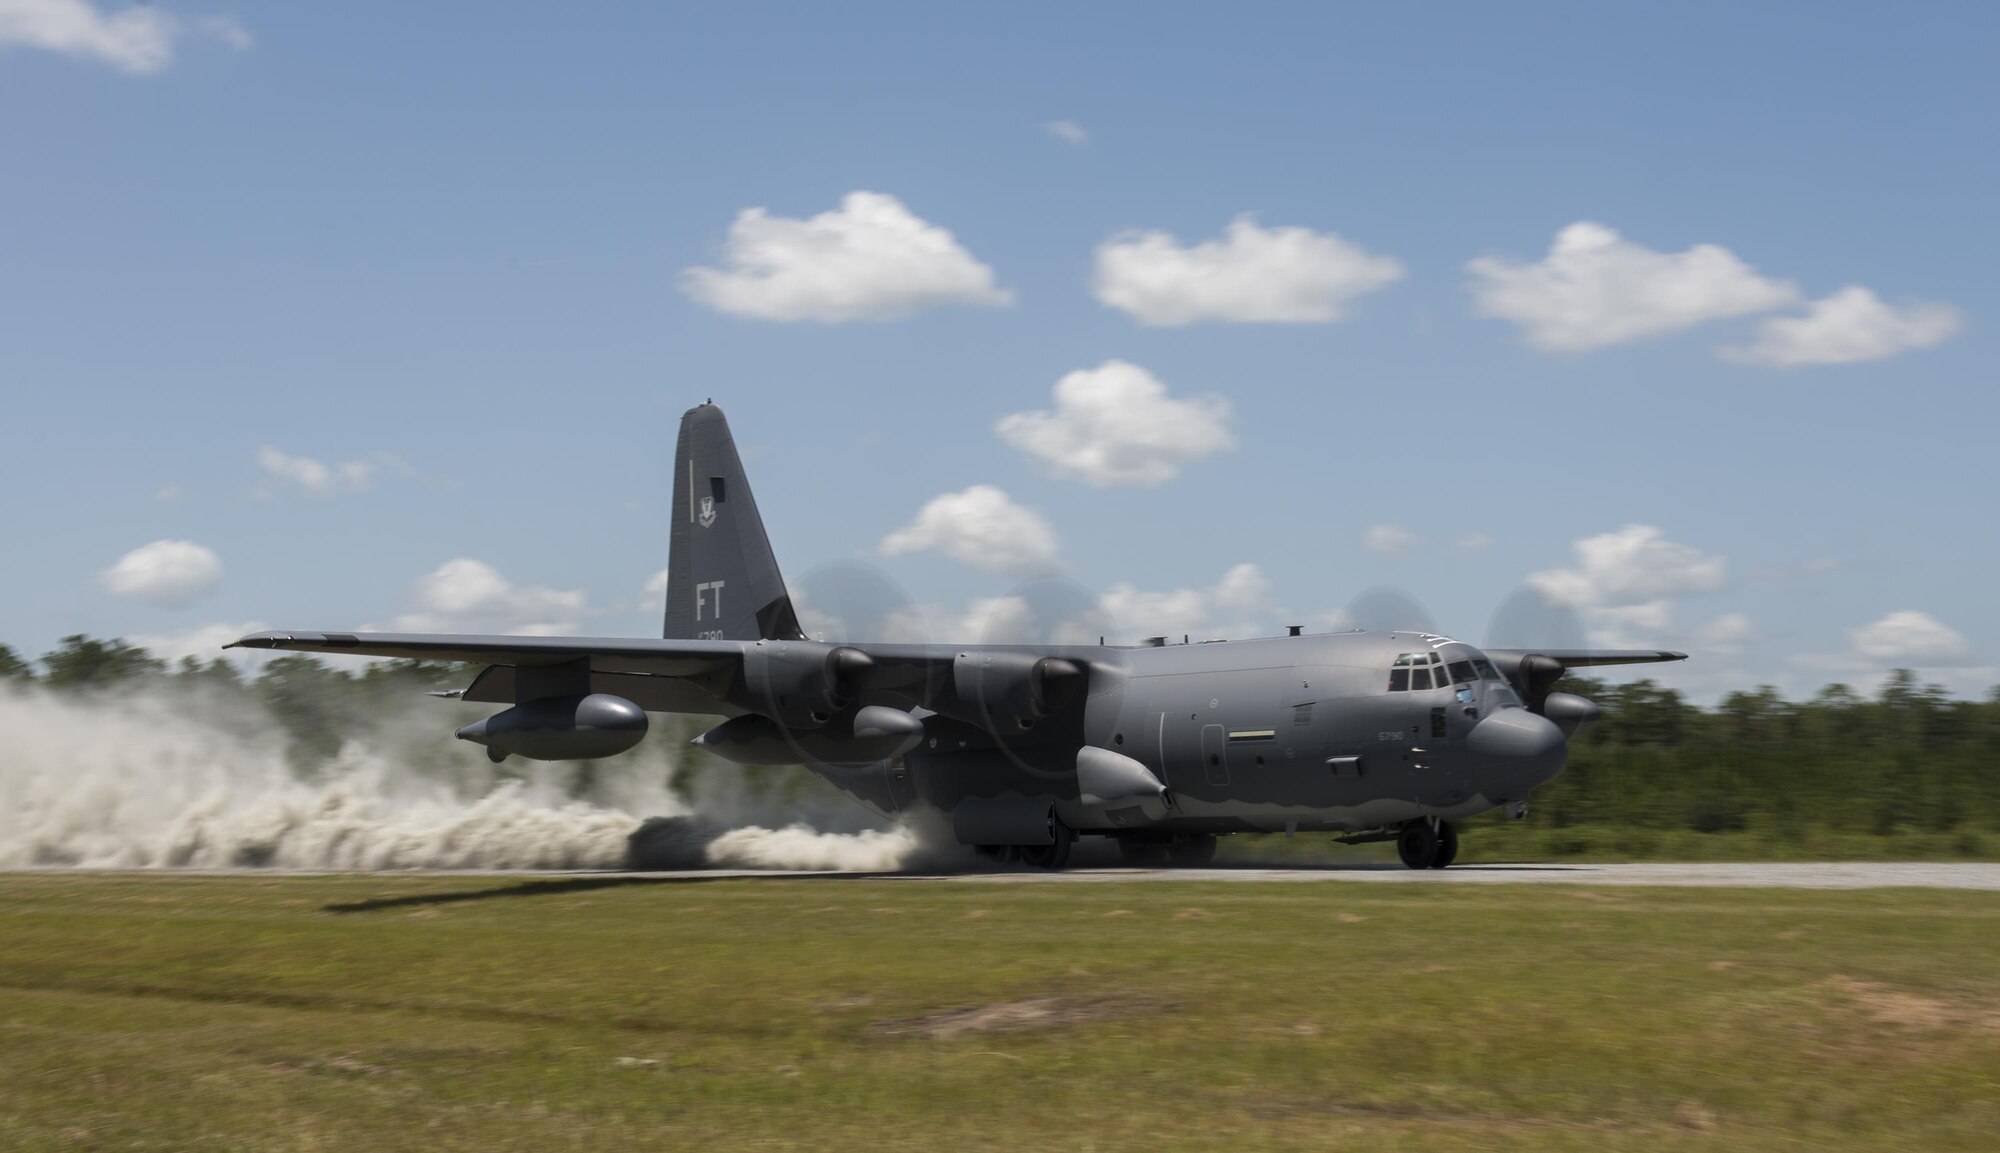 An HC-130J Combat King II from the 71st Rescue Squadron lands on the Bemiss Field unimproved landing zone, July 29, 2016, at Grand Bay Bombing and Gunnery Range, Ga. This flight marked the first time an HC-130J landed at the ULZ on Bemiss Field, which was previously used for airdrops and helicopter landings. The landing validated the pilot’s training for future operations in austere locations and met requirements for training that cannot be accomplished on paved runways or assault strips. (U.S. Air Force photo by Tech. Sgt. Zachary Wolf)
